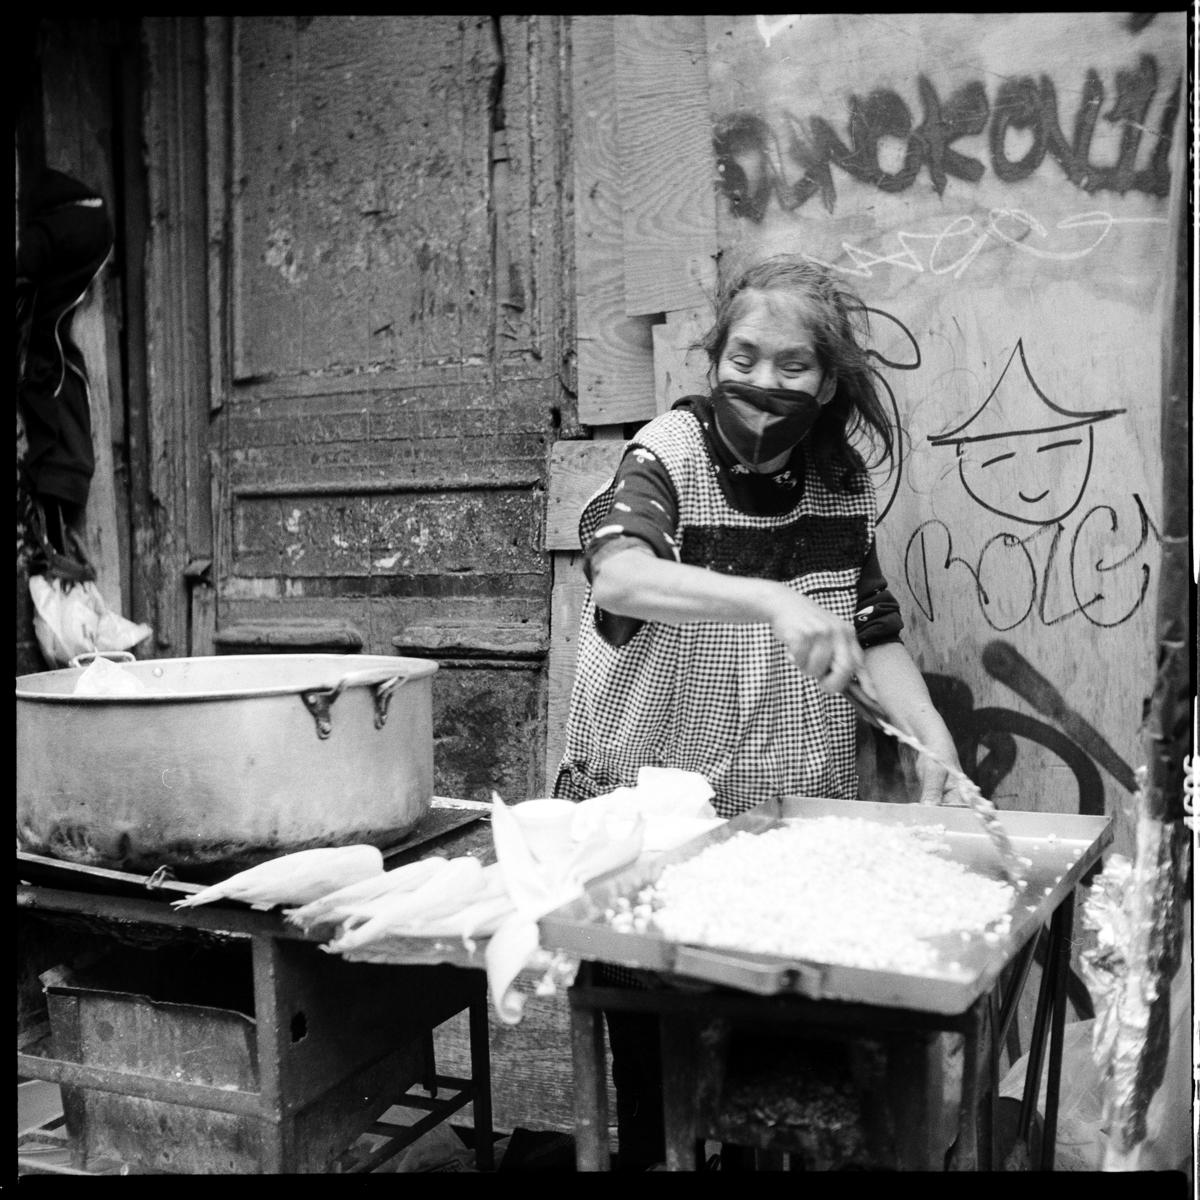 analog black-and-white street photograph of an elderly woman street vendor in Mexico City